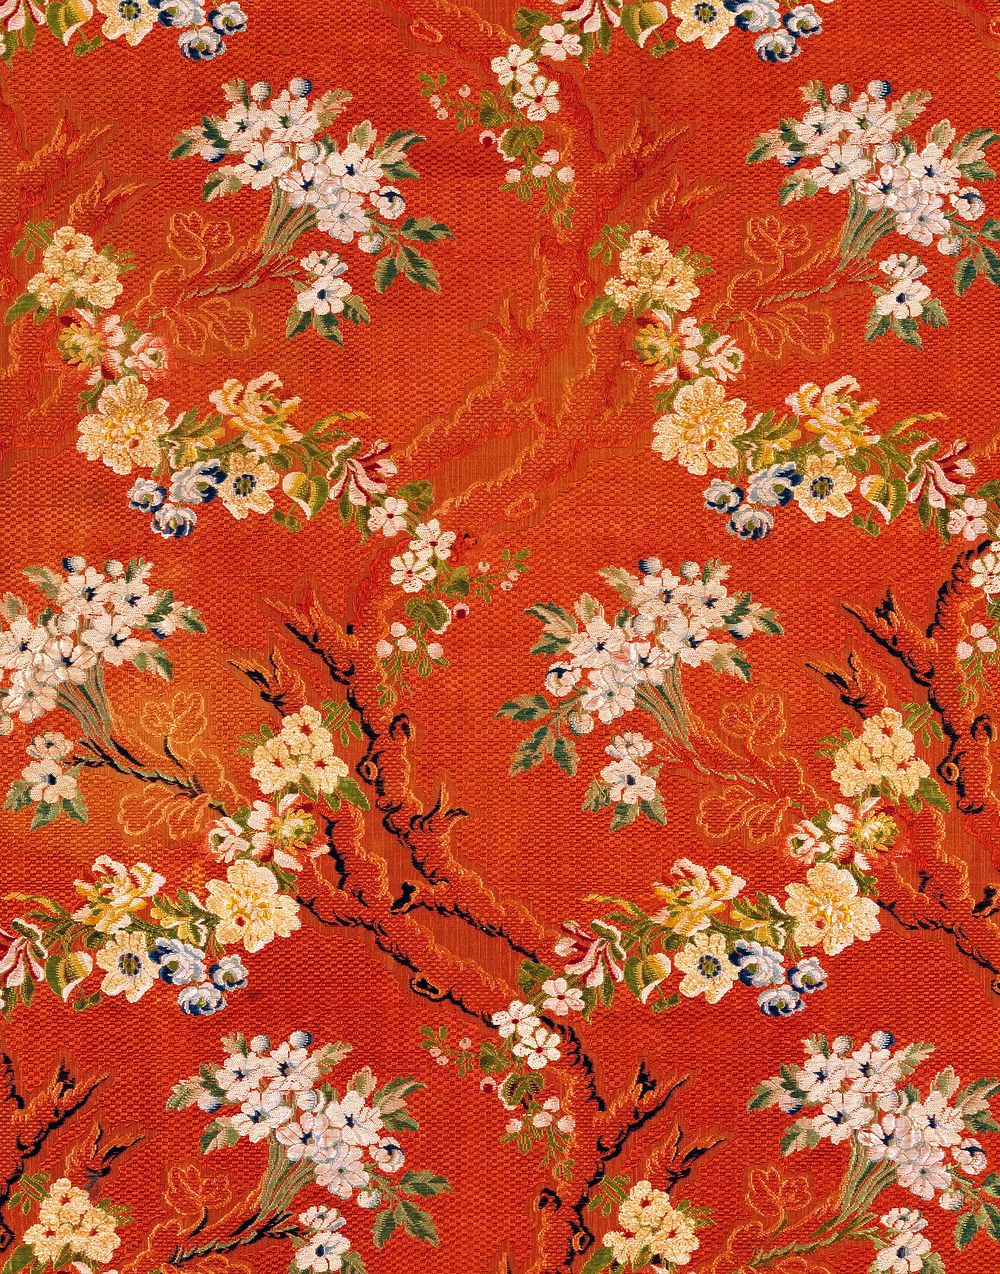 brick patterned; brocaded in silk chenille with floral bouquets. Original from the Minneapolis Institute of Art.